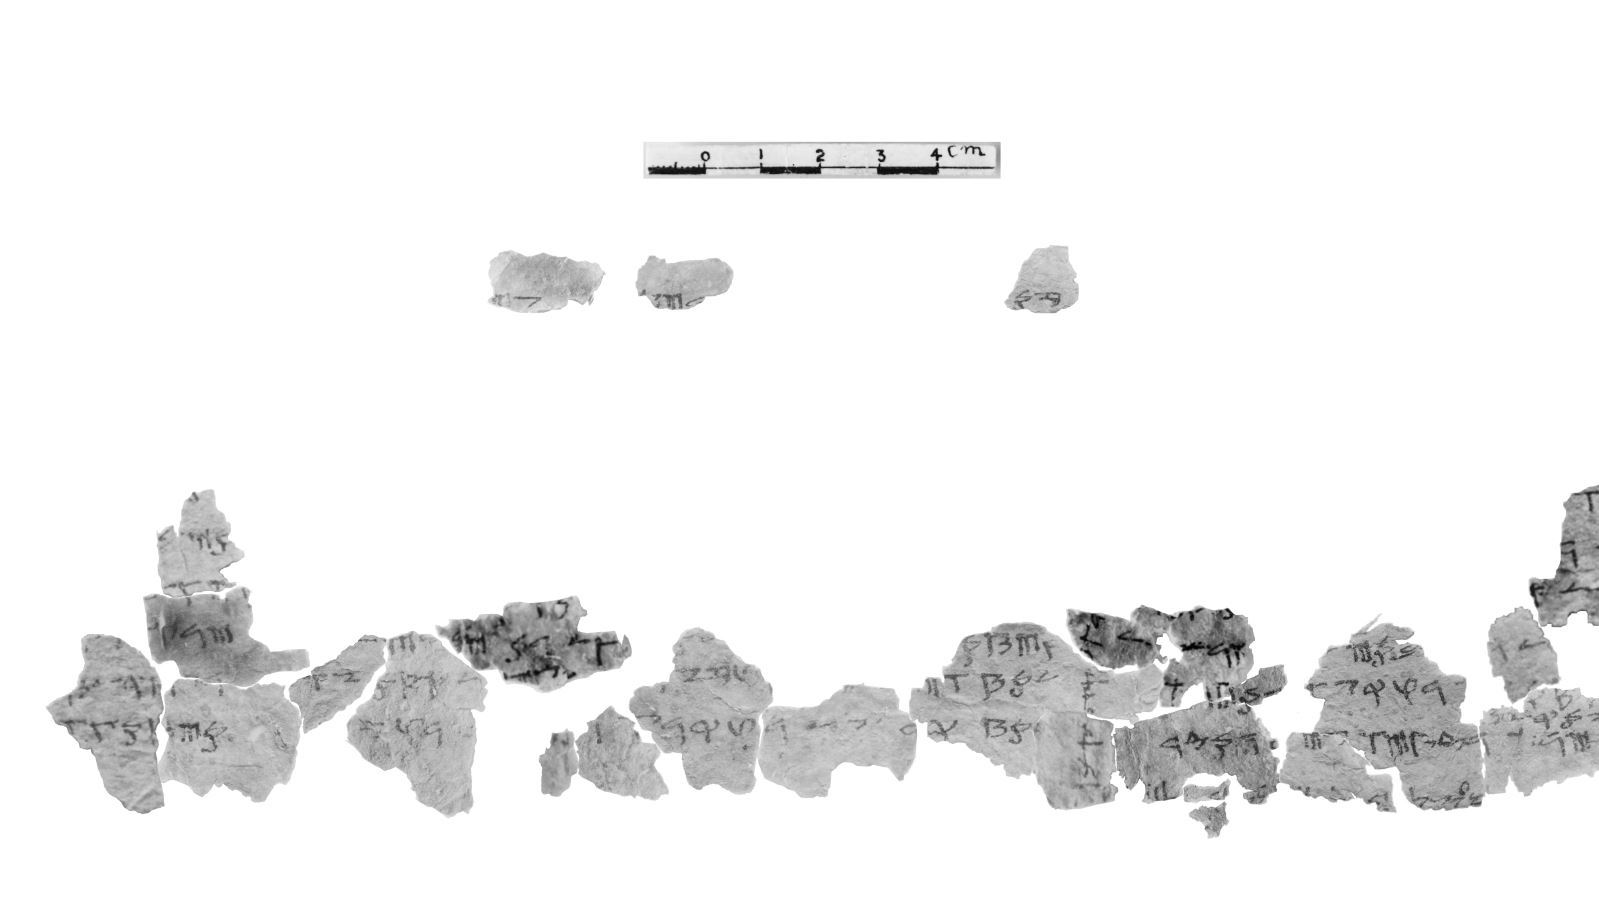 A fragment of the reconstructed Qumran Scroll. Photo courtesy of University of Haifa